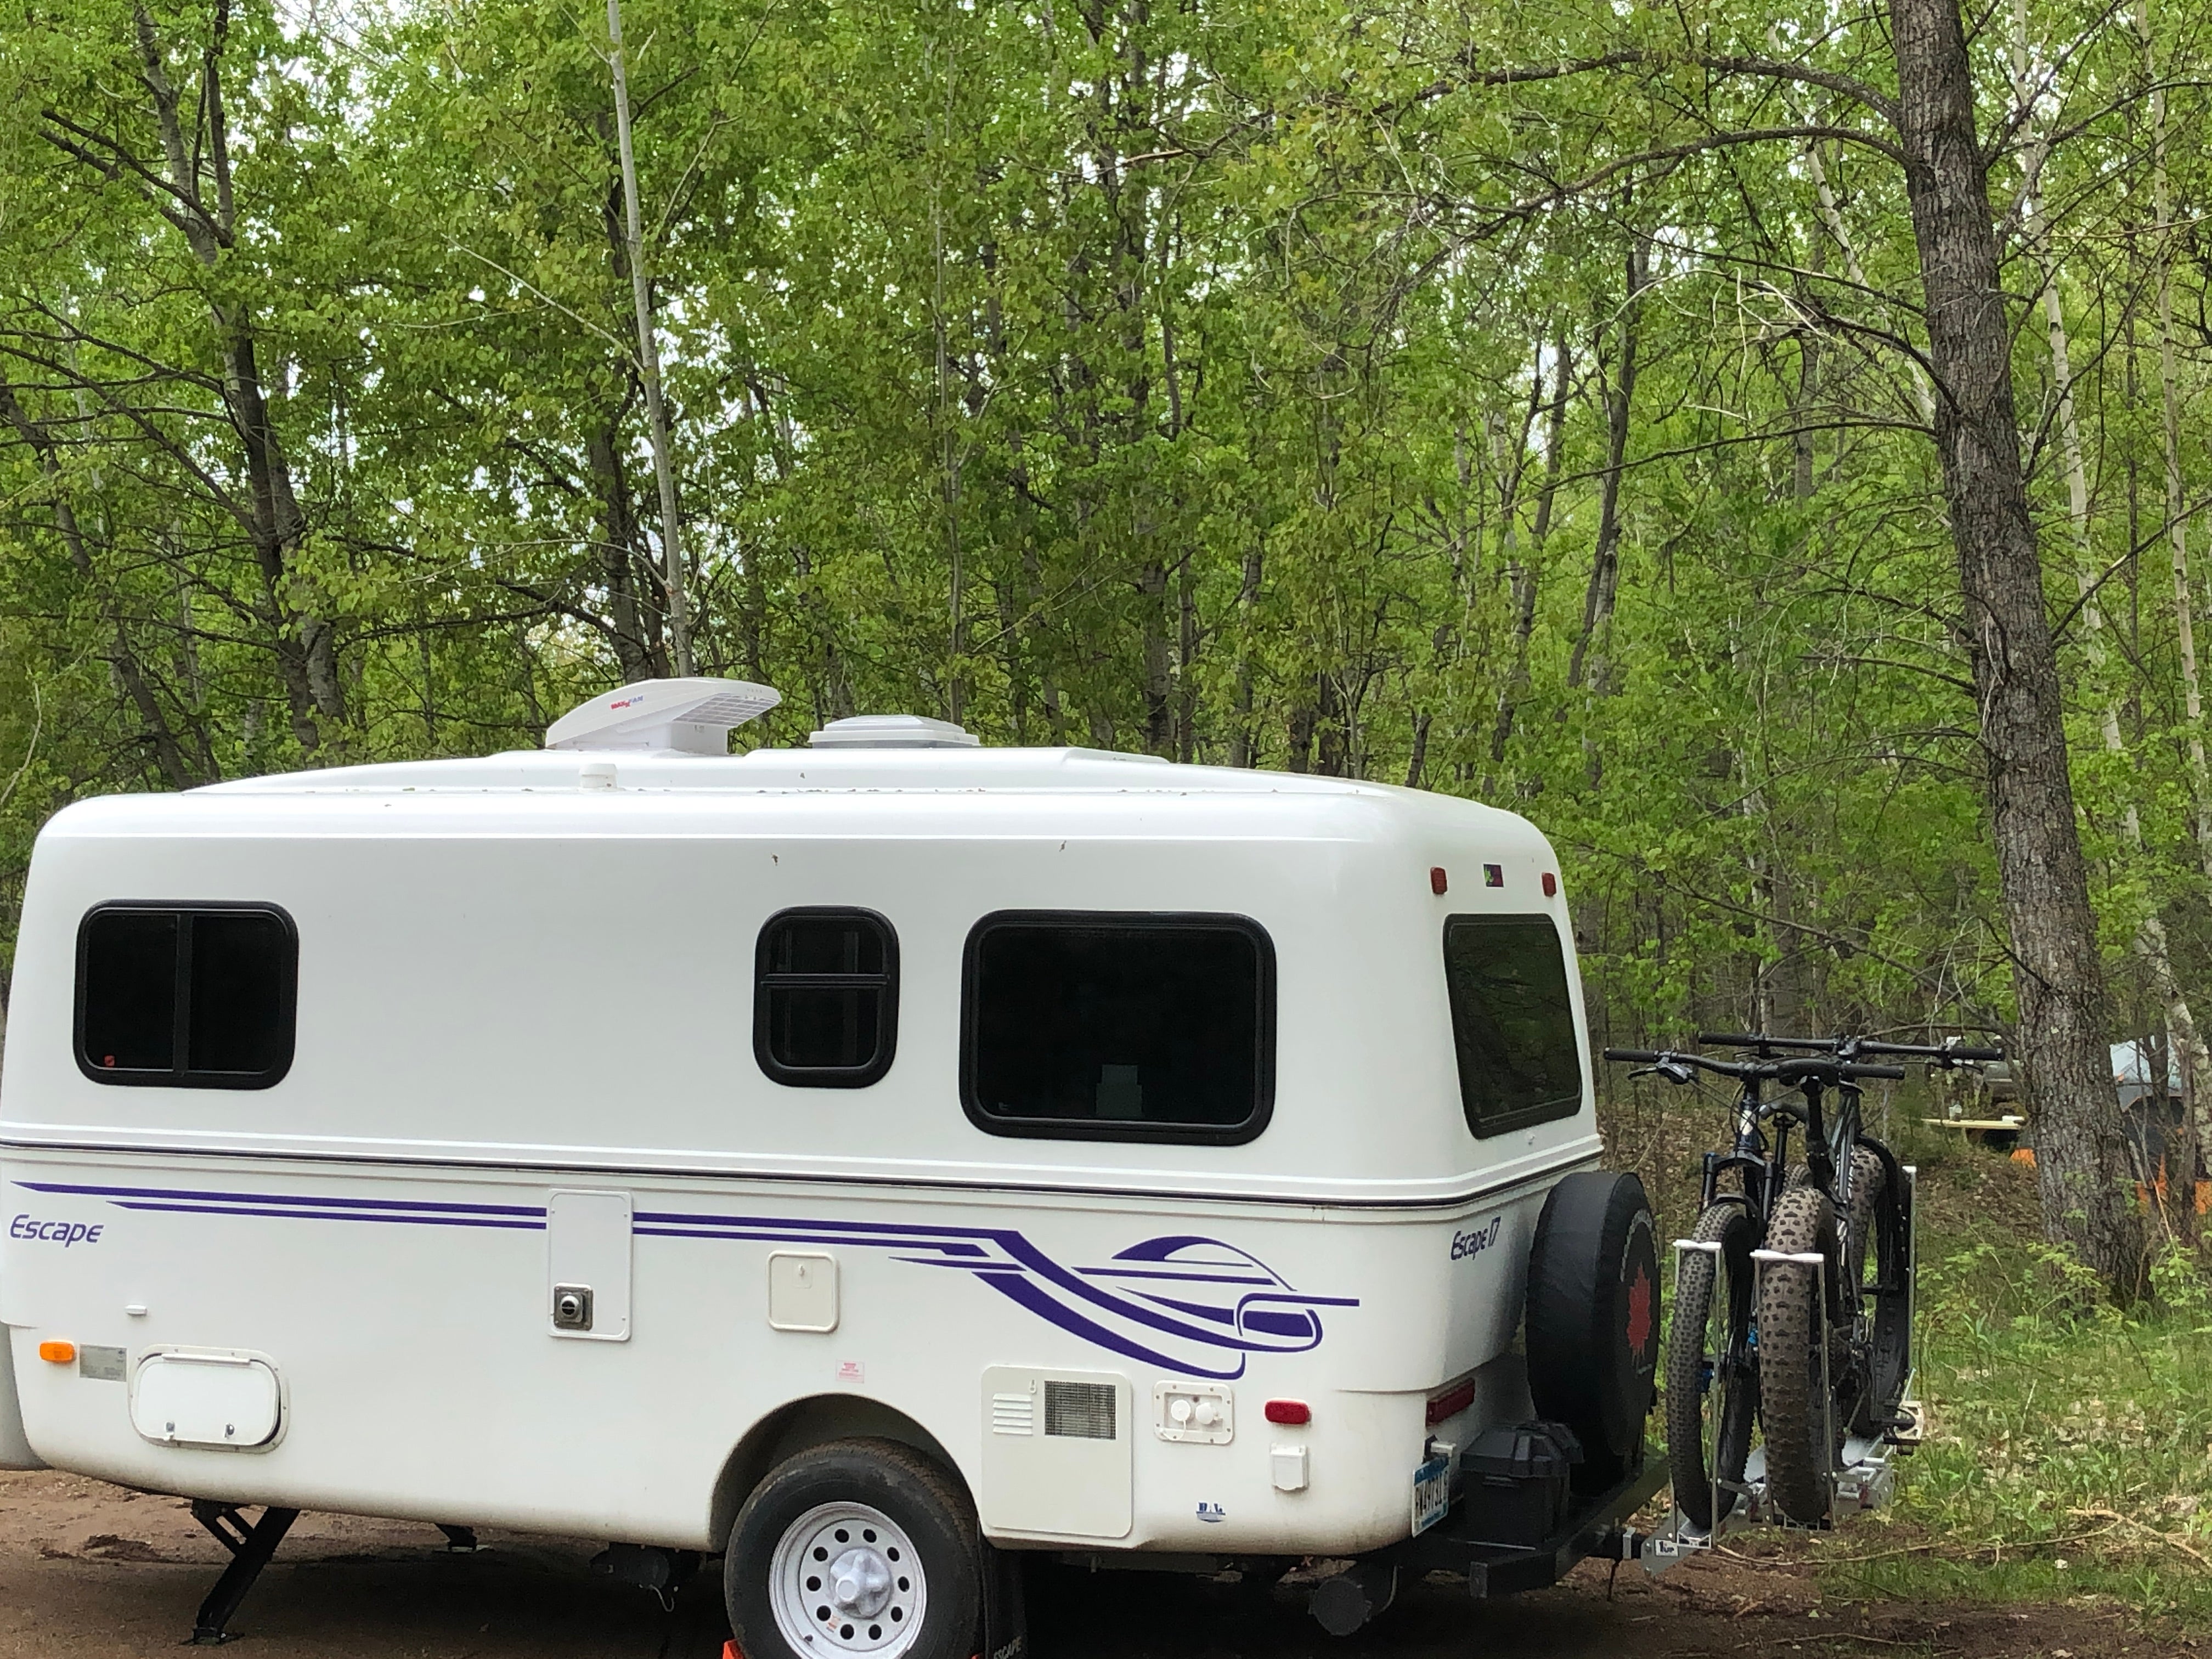 Great location, connected to Cuyuna mountain bike trail system.